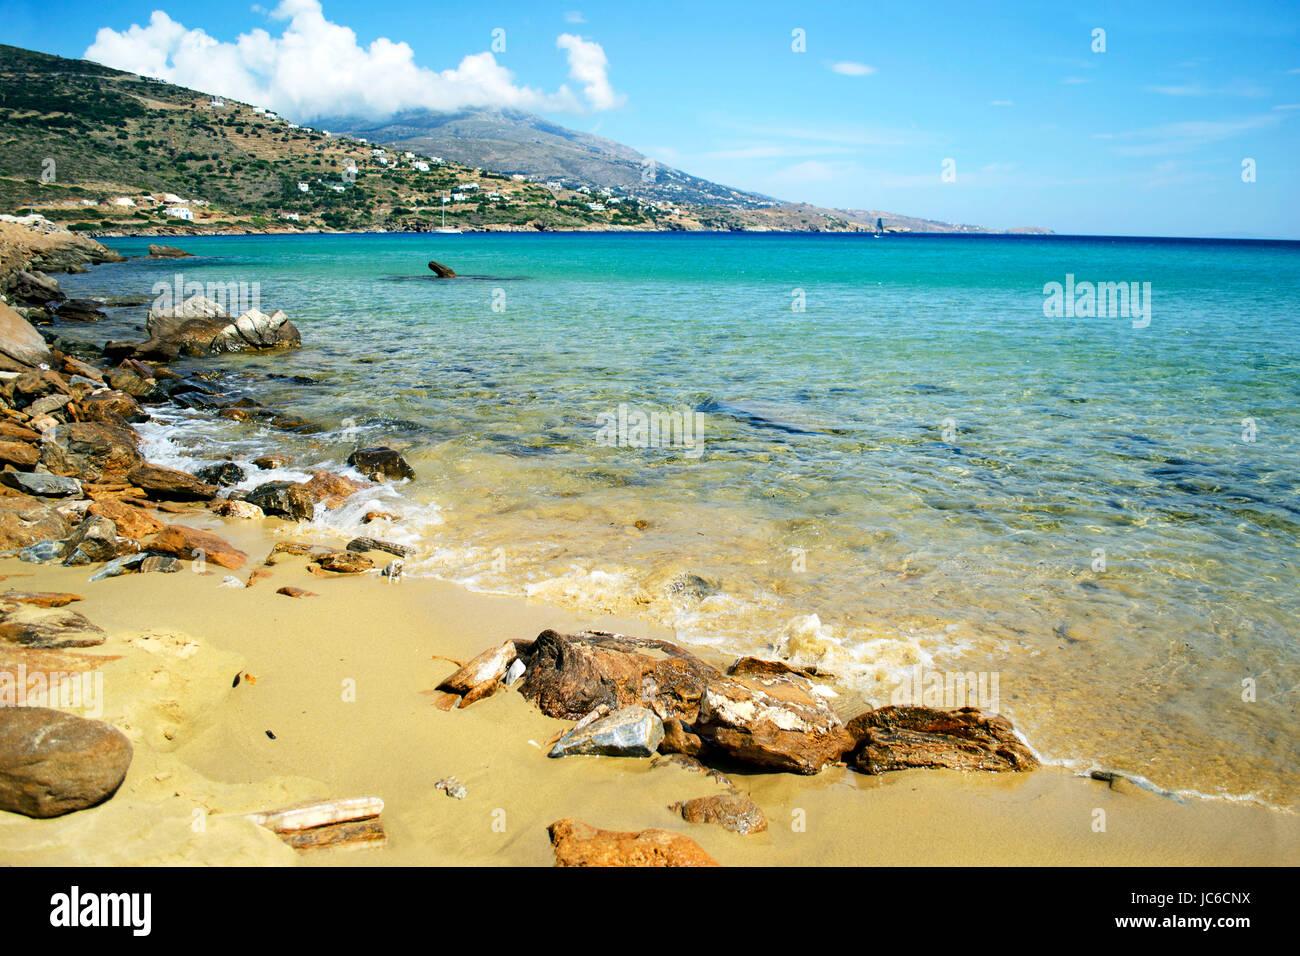 Chrissi Ammos beach in Andros island Greece Stock Photo